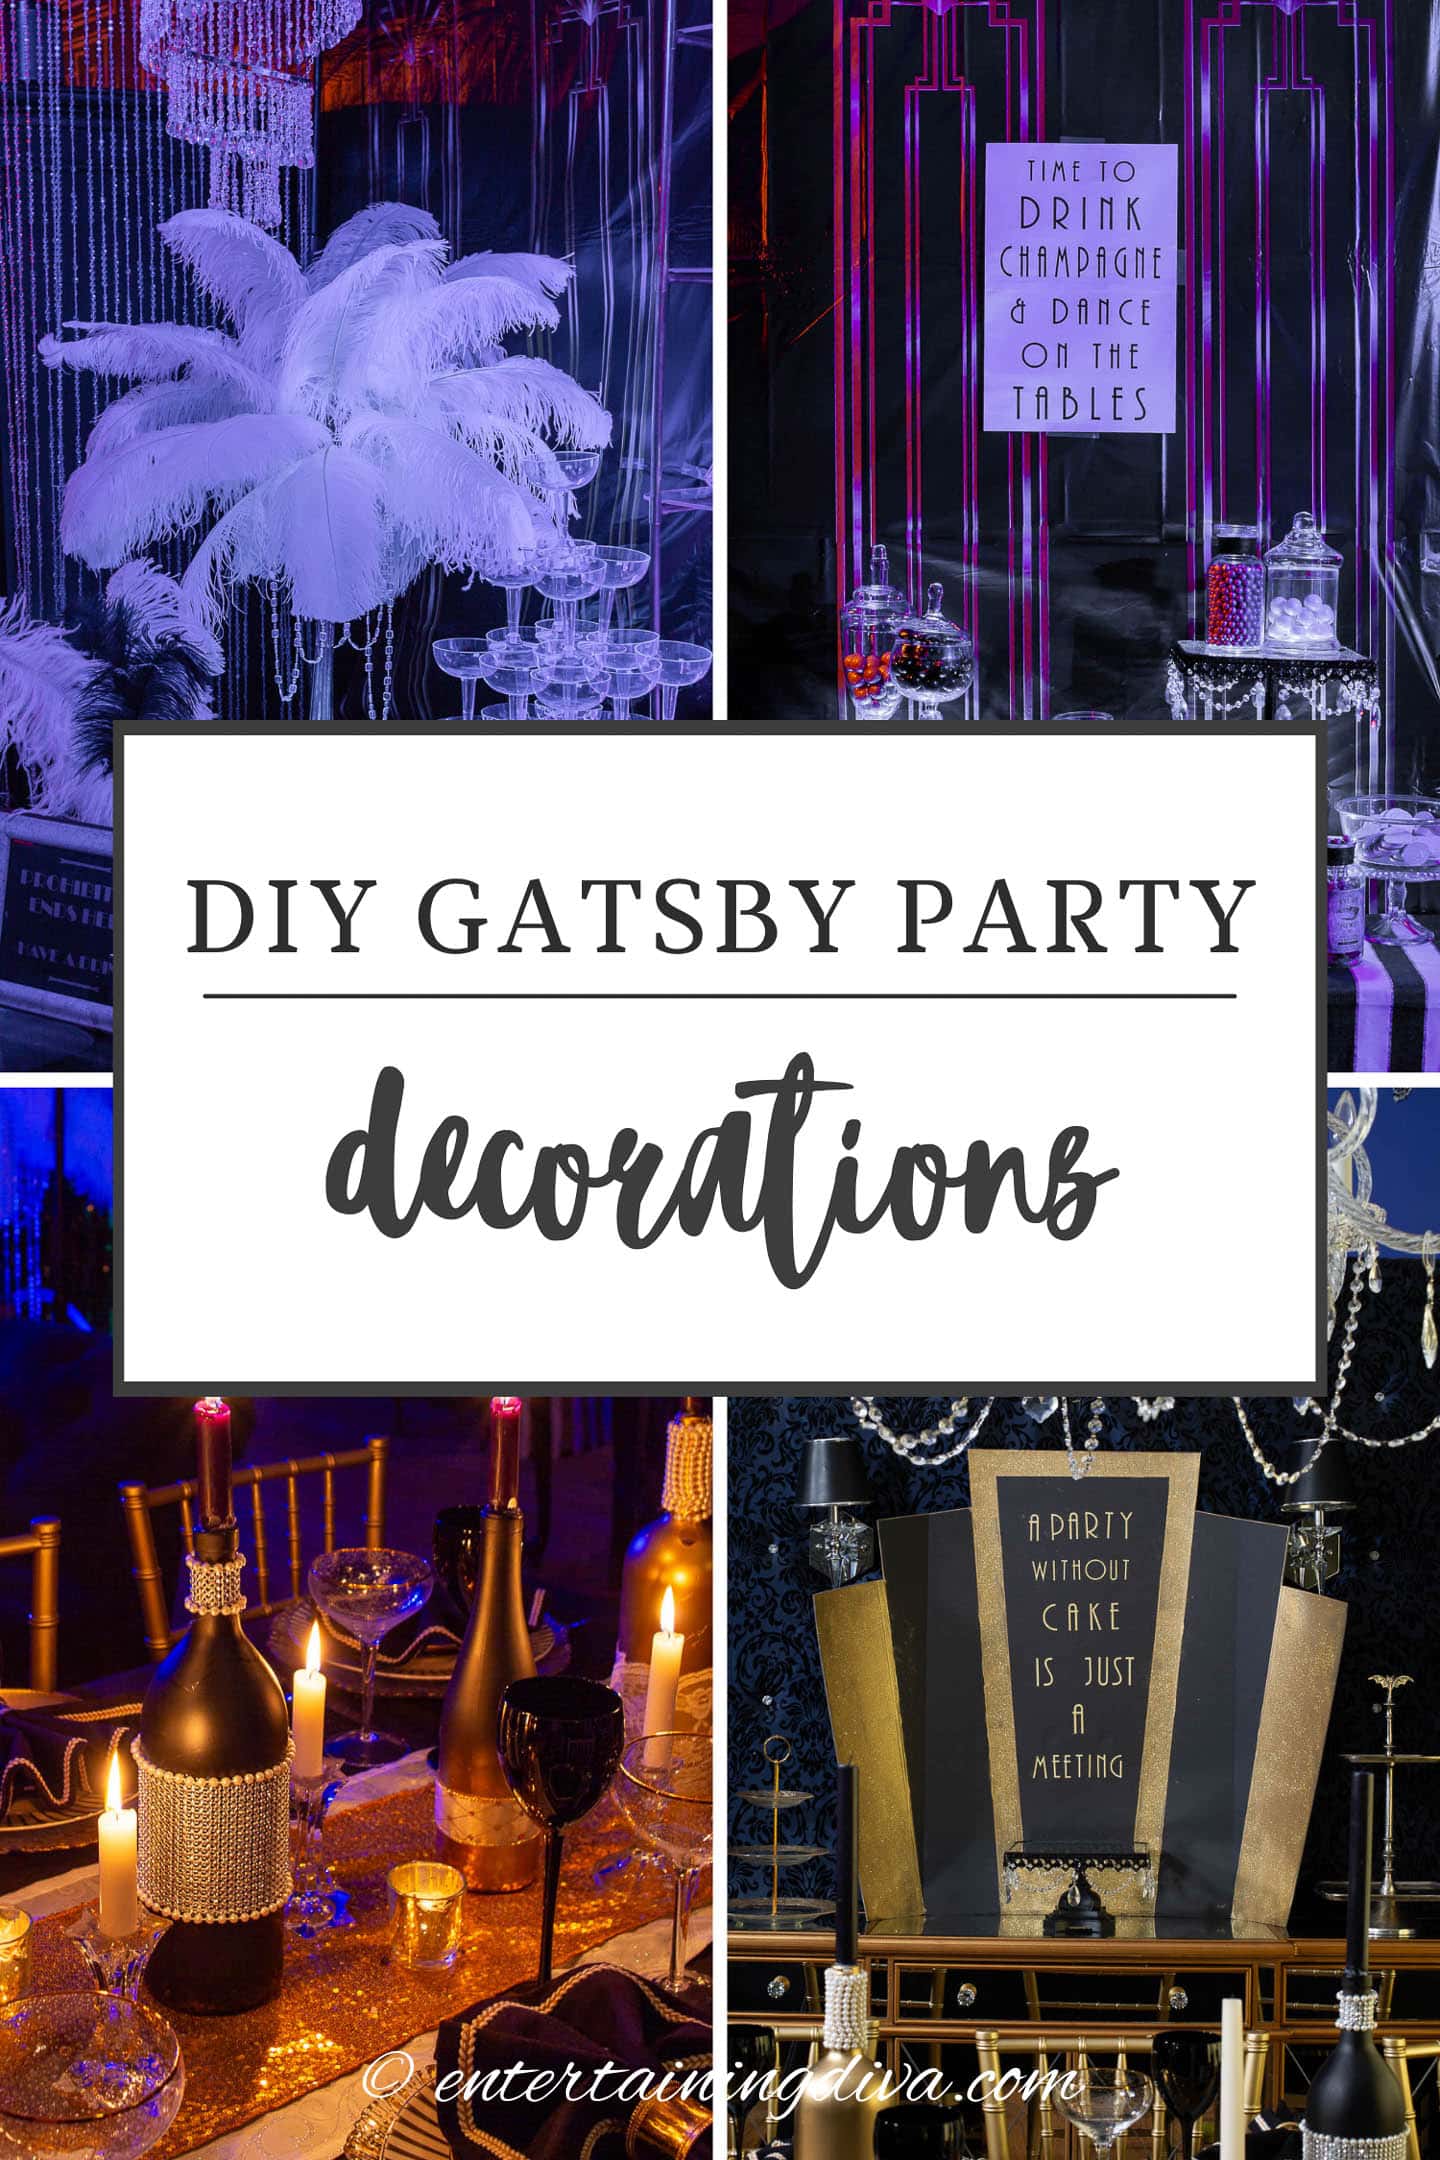 DIY Great Gatsby party decorations